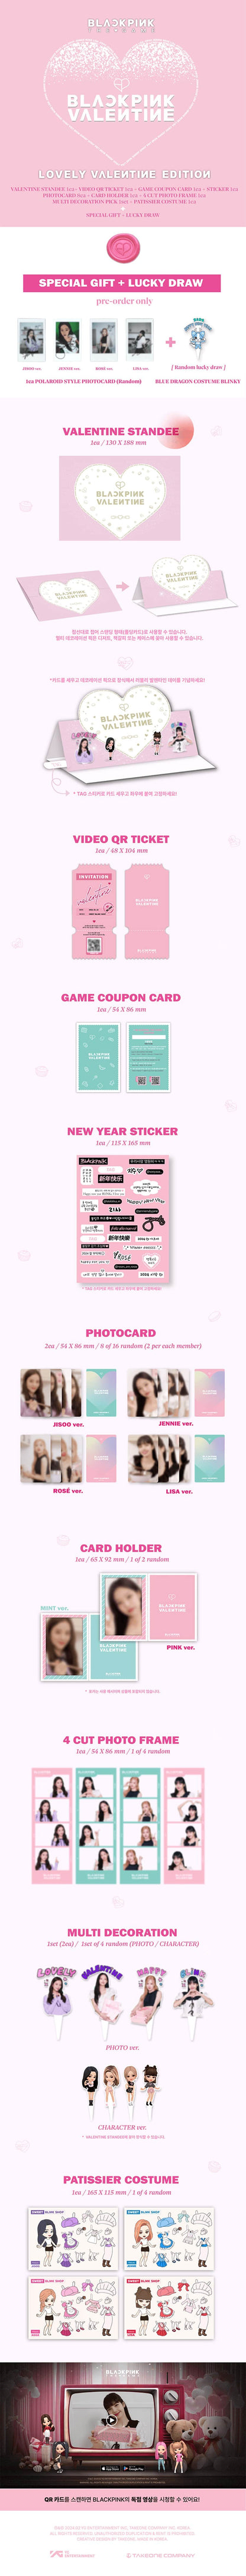 (Weverse POB) BLACKPINK - The Games Photocard Collection Loverly Valentine’s Edition